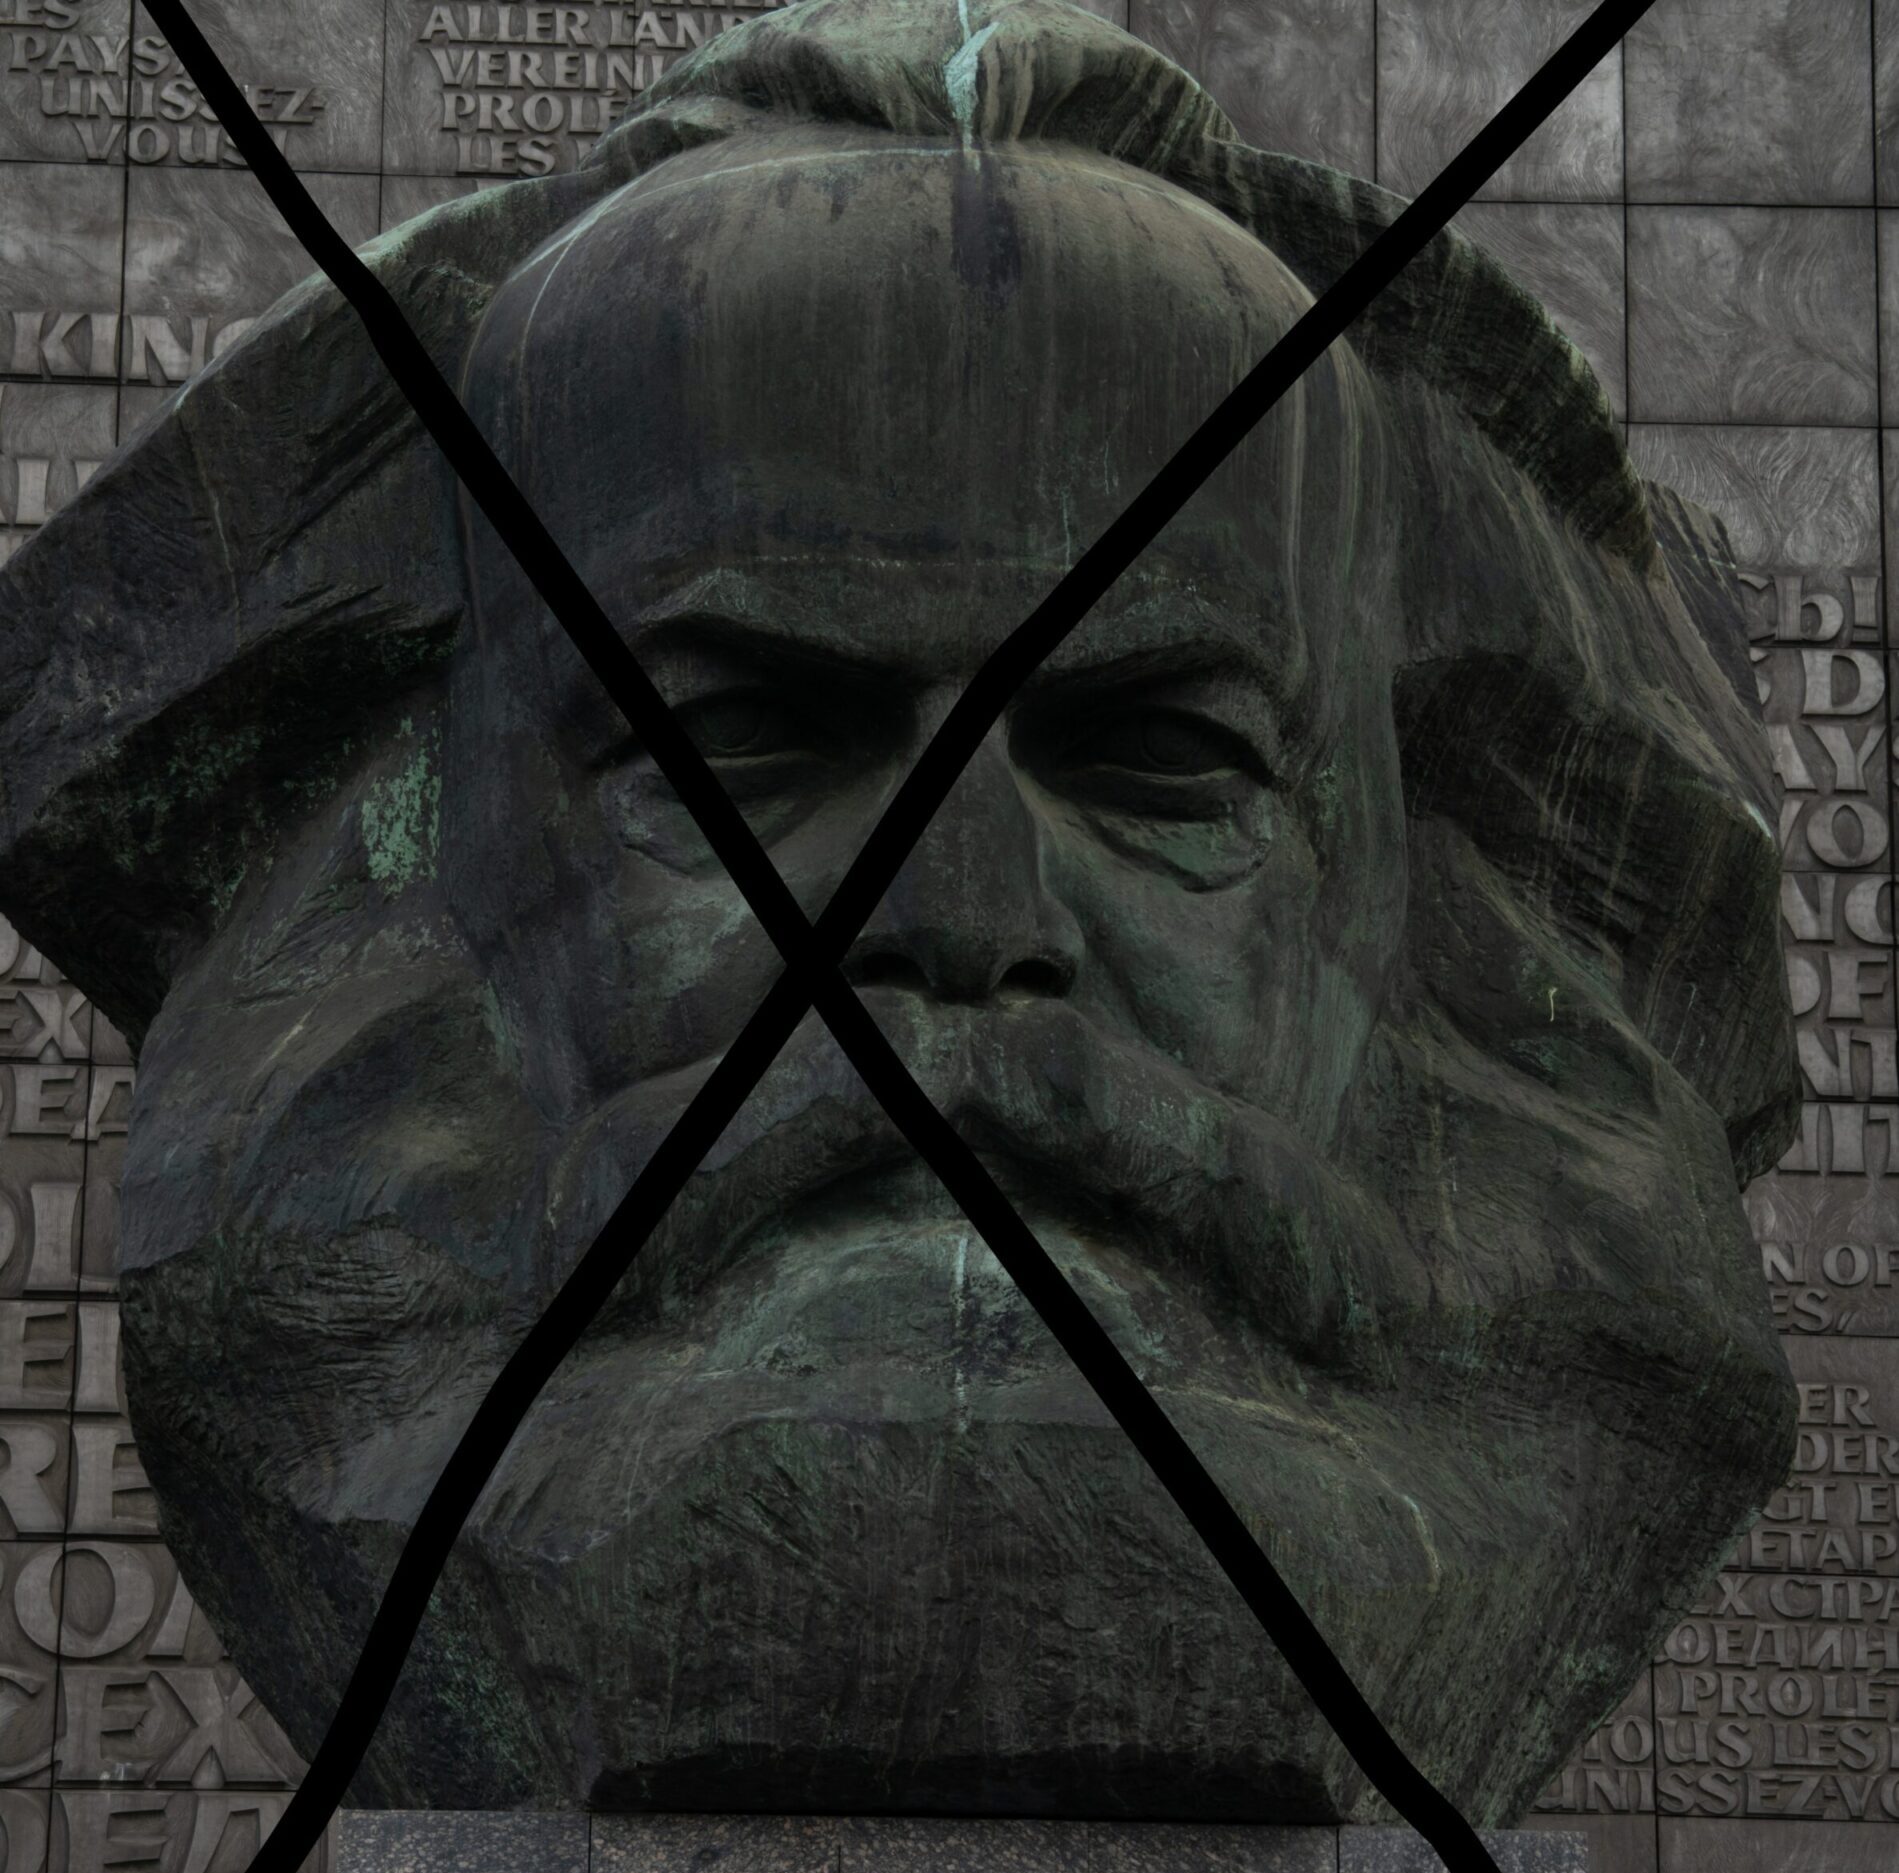 Image of Karl Marx with an overlap "X." Photo: The Philosophical Salon.